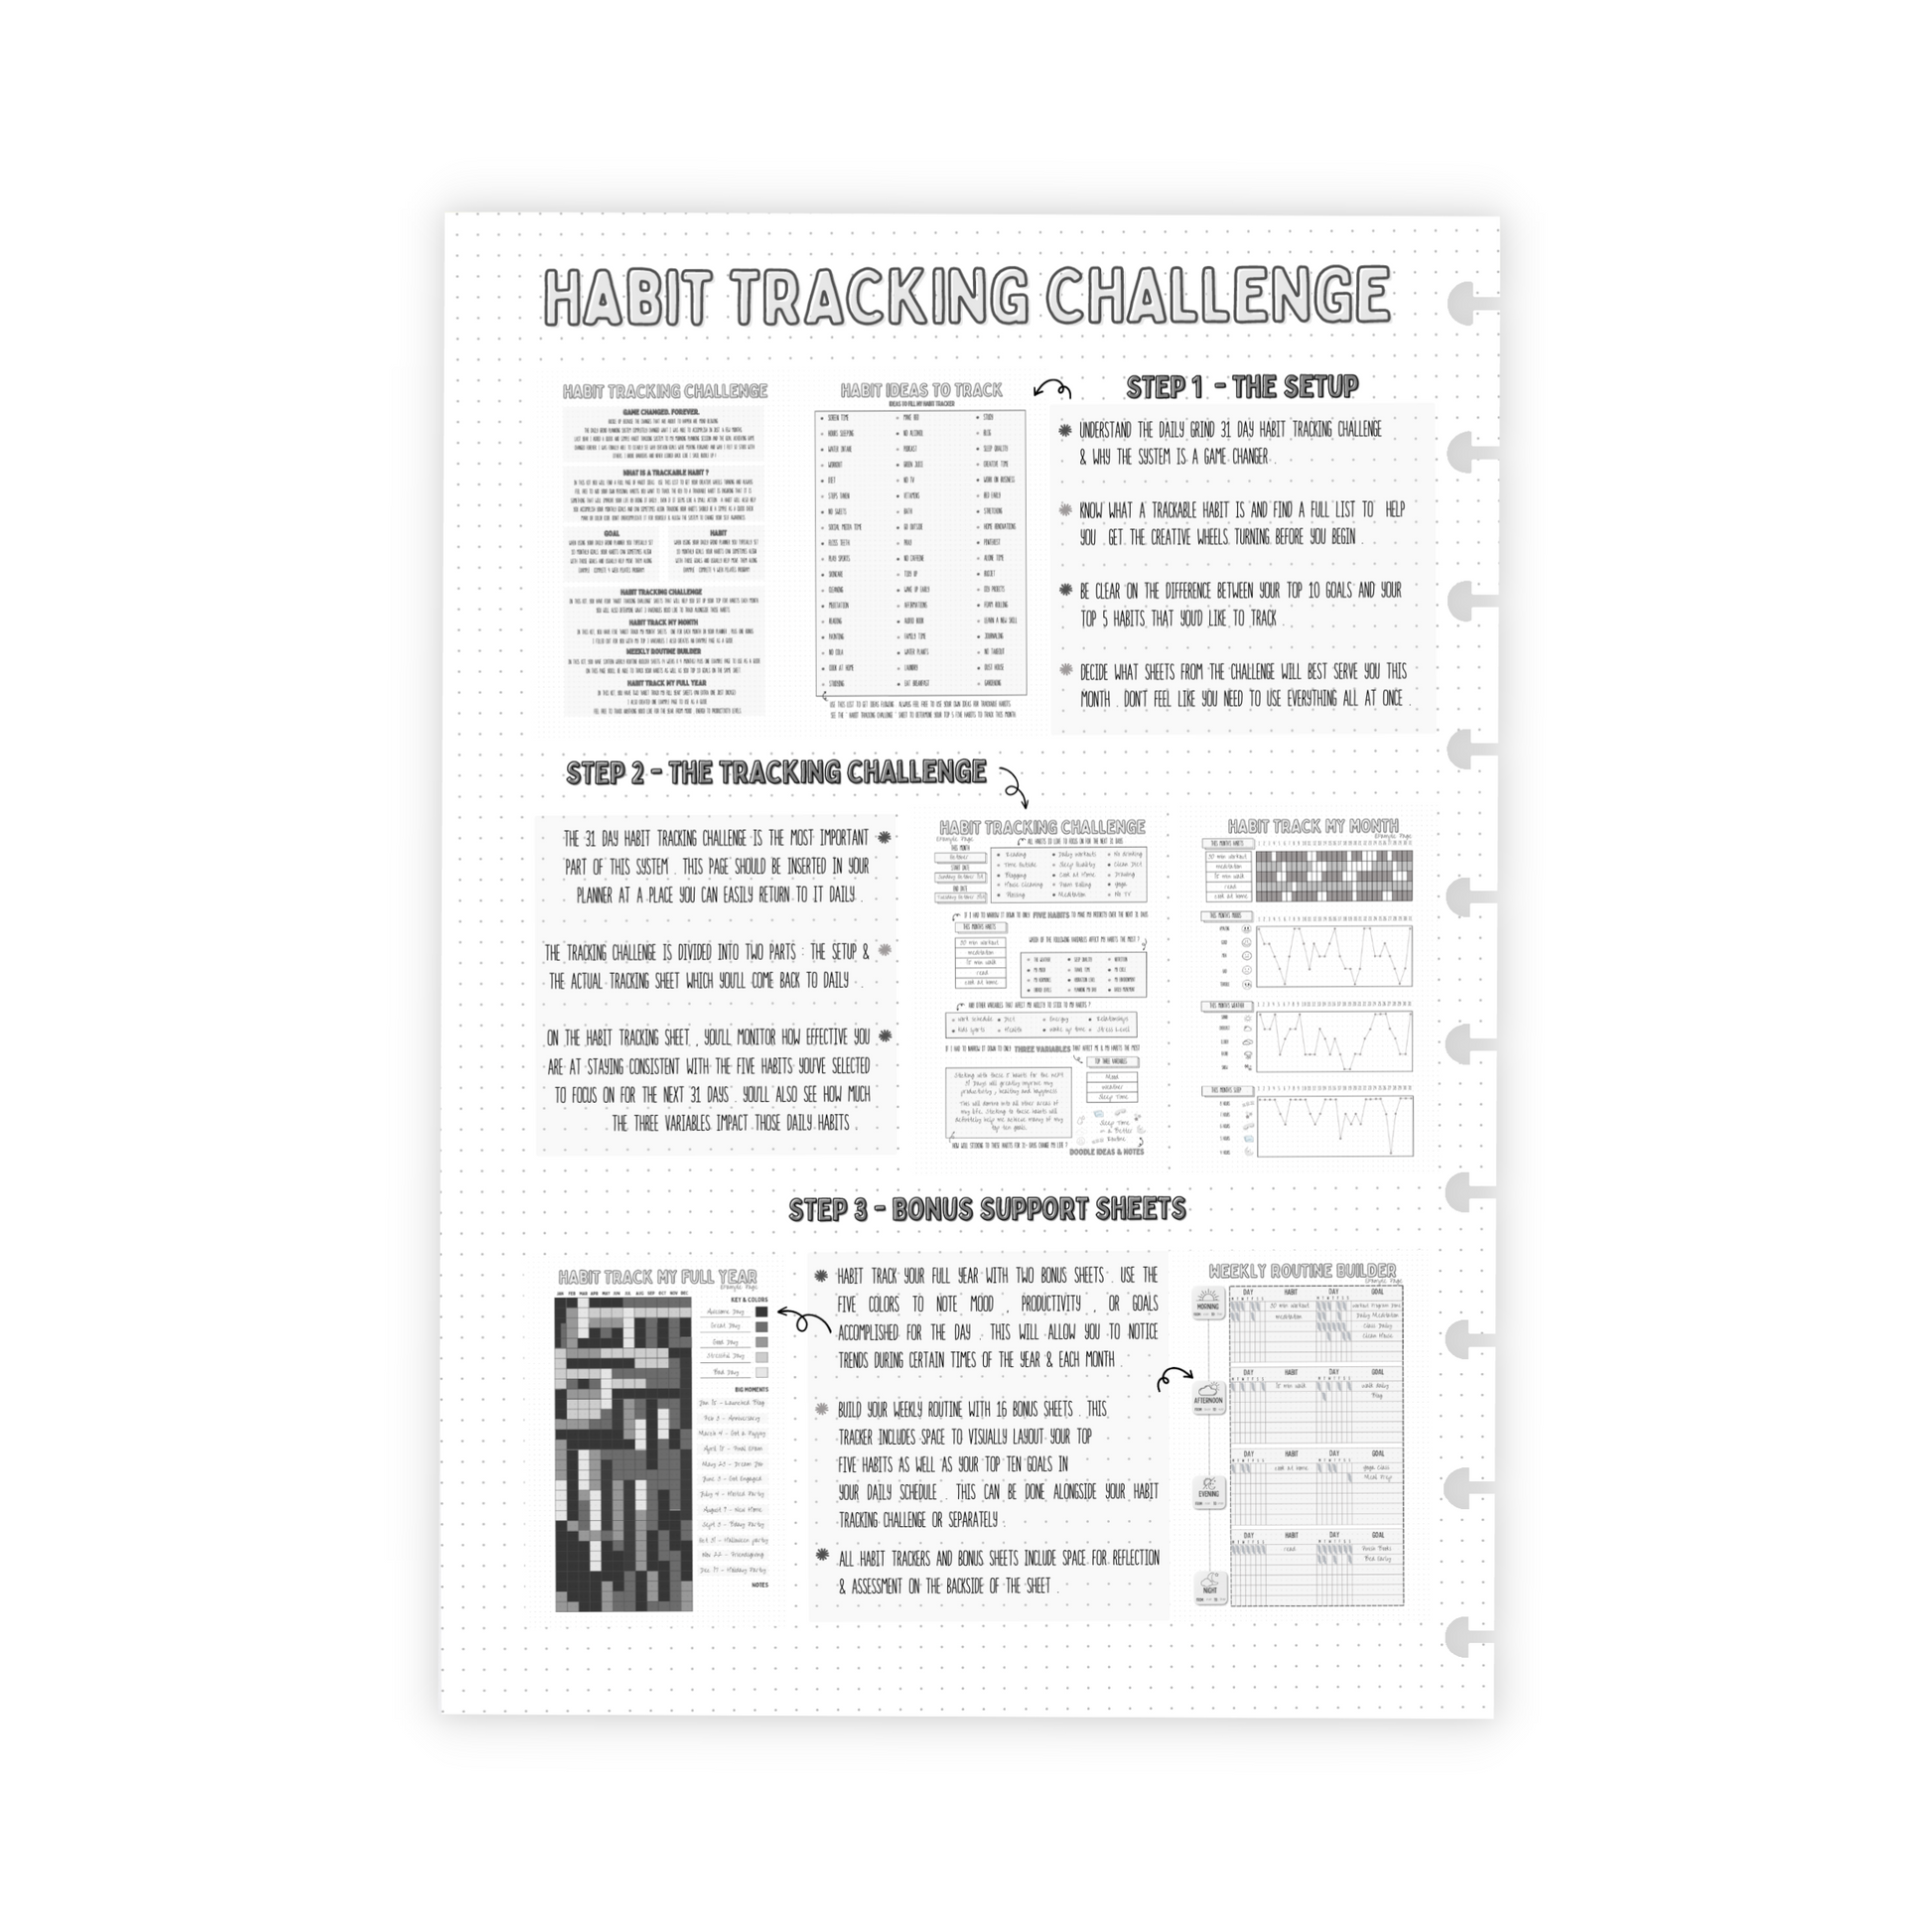 "Habit Tracking Challenge" instruction page